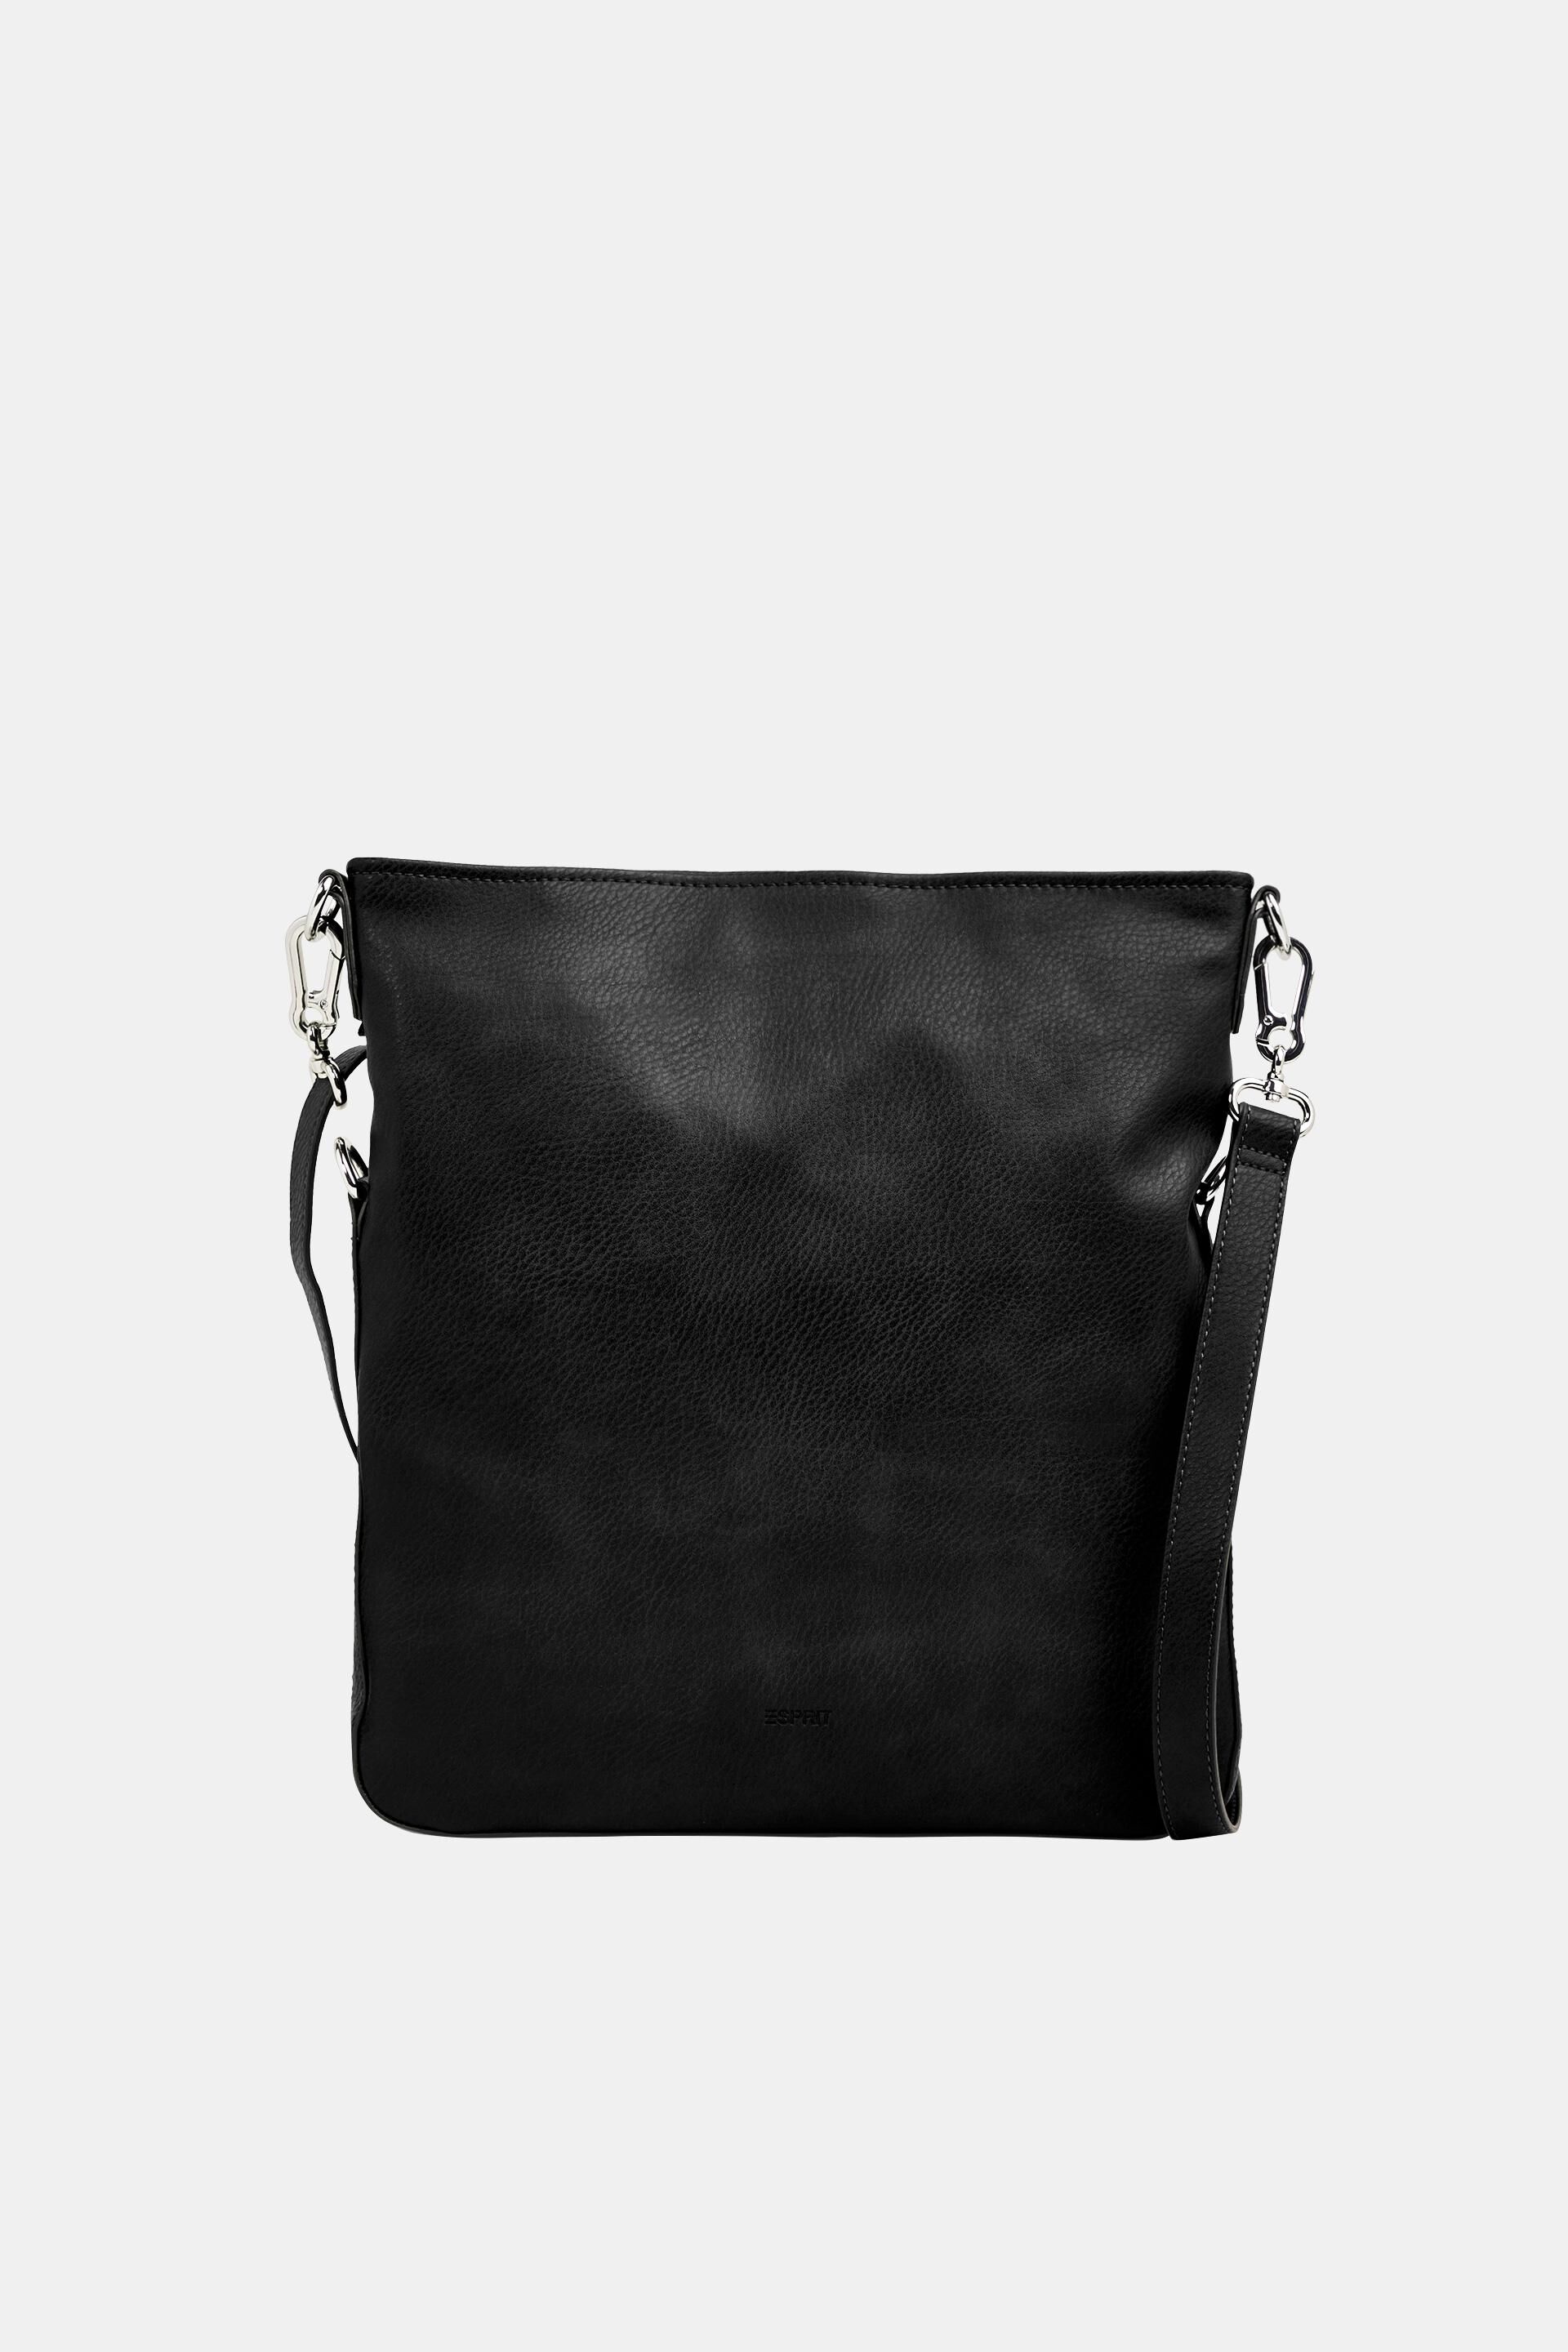 Esprit in leather Flapover bag faux